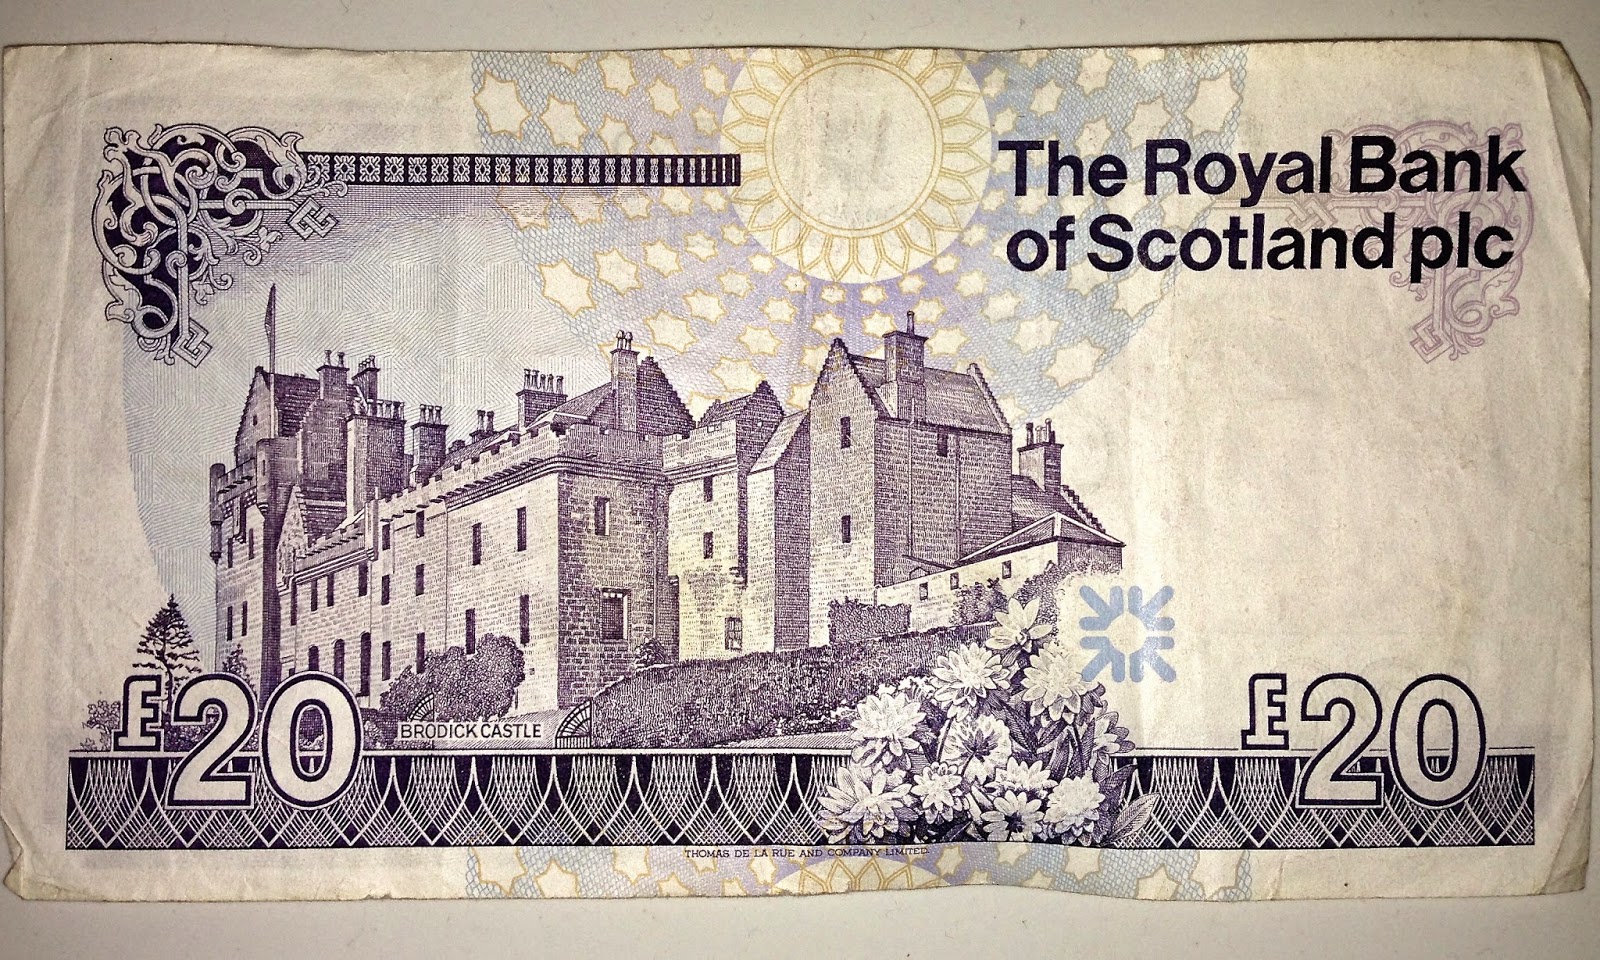 Brodick Castle on the Royal Bank of Scotland's £20 bill